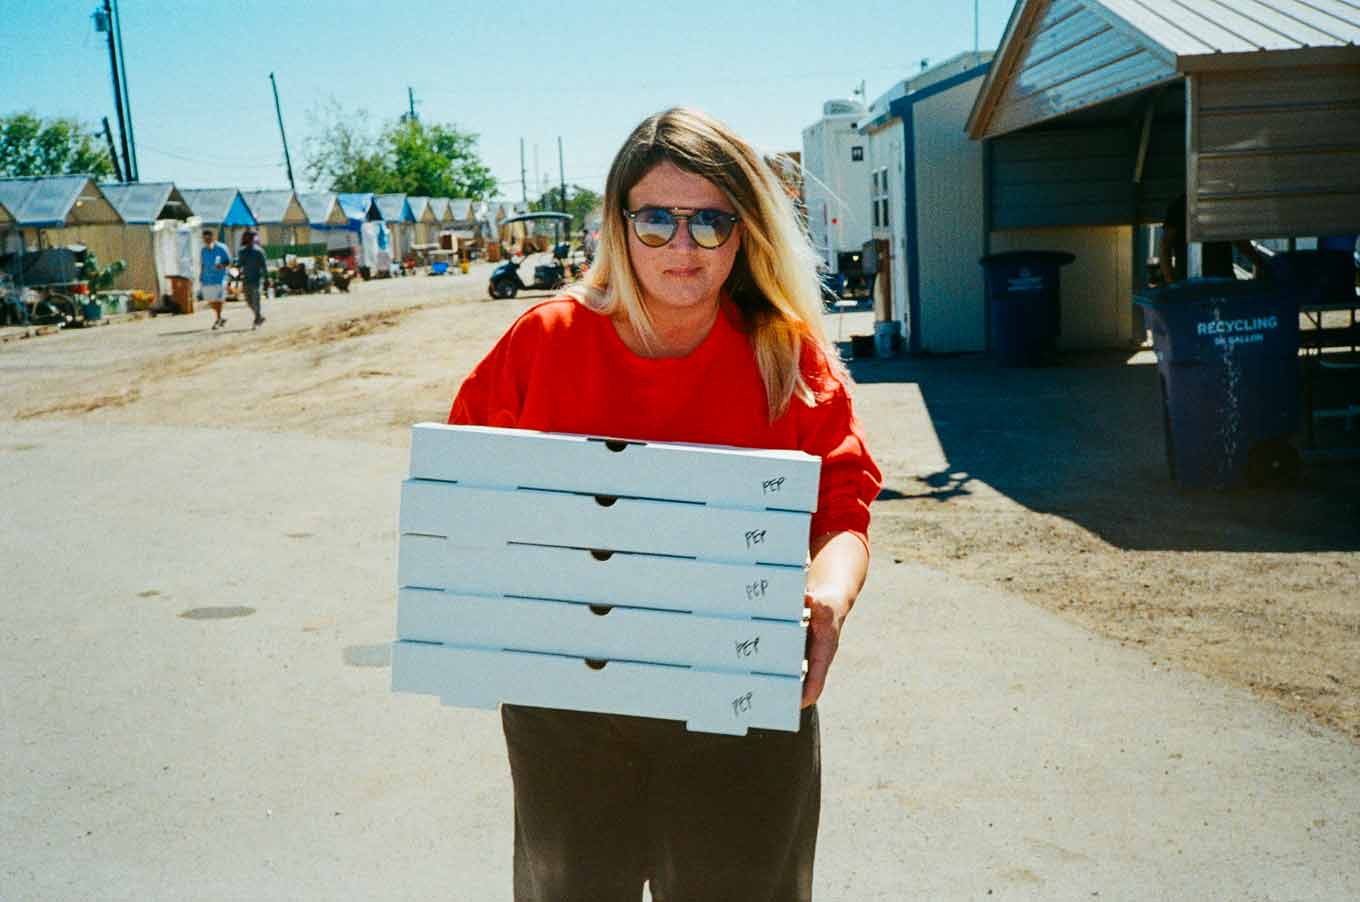 A woman with blonde hair wears a red crewneck sweatshirt and black sunglasses while holding five boxes of pizza